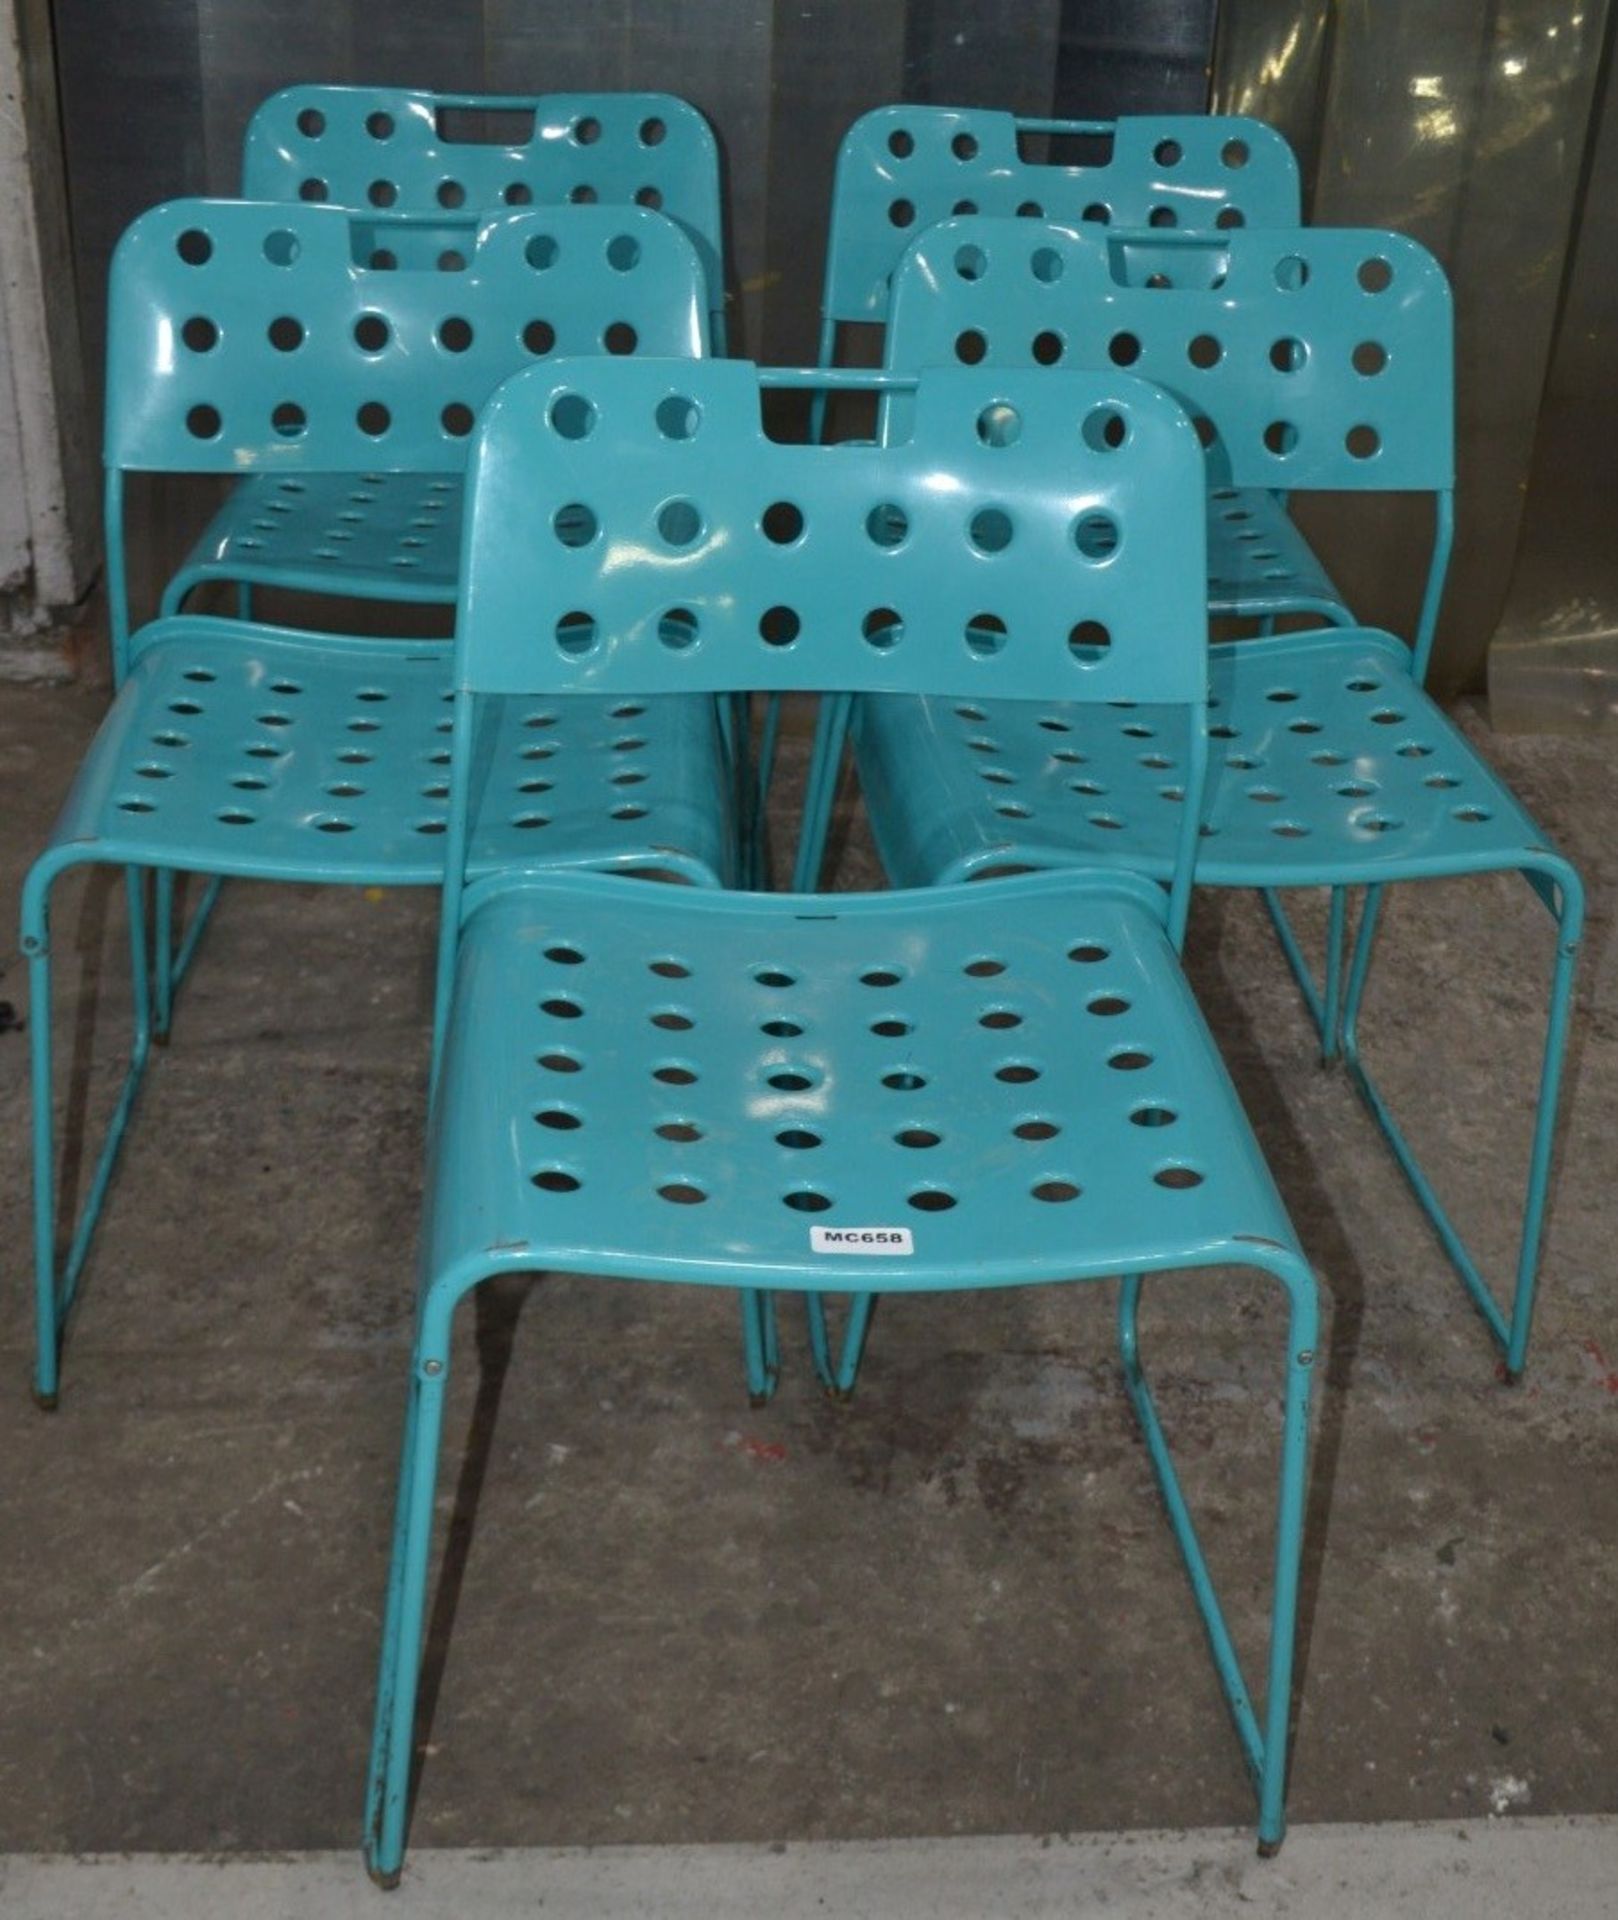 5 x Rustic Metal Commercial Bistro Chairs In Blue - Dimensions: H74 x W44 x D45cm, Seat 47cm